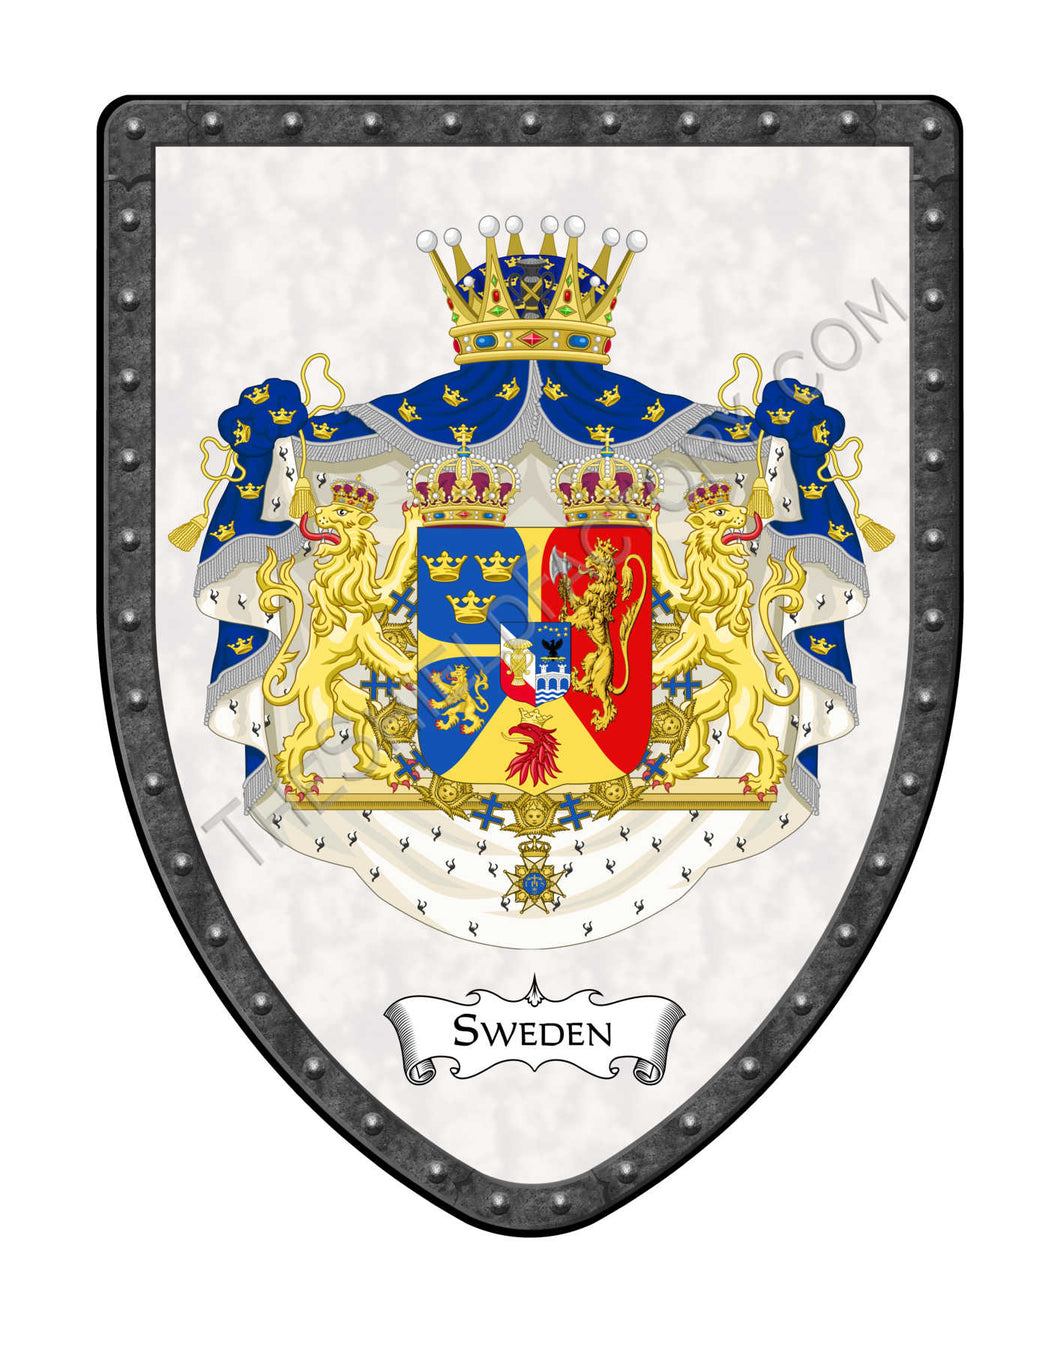 Sweden Coat of Arms Shield